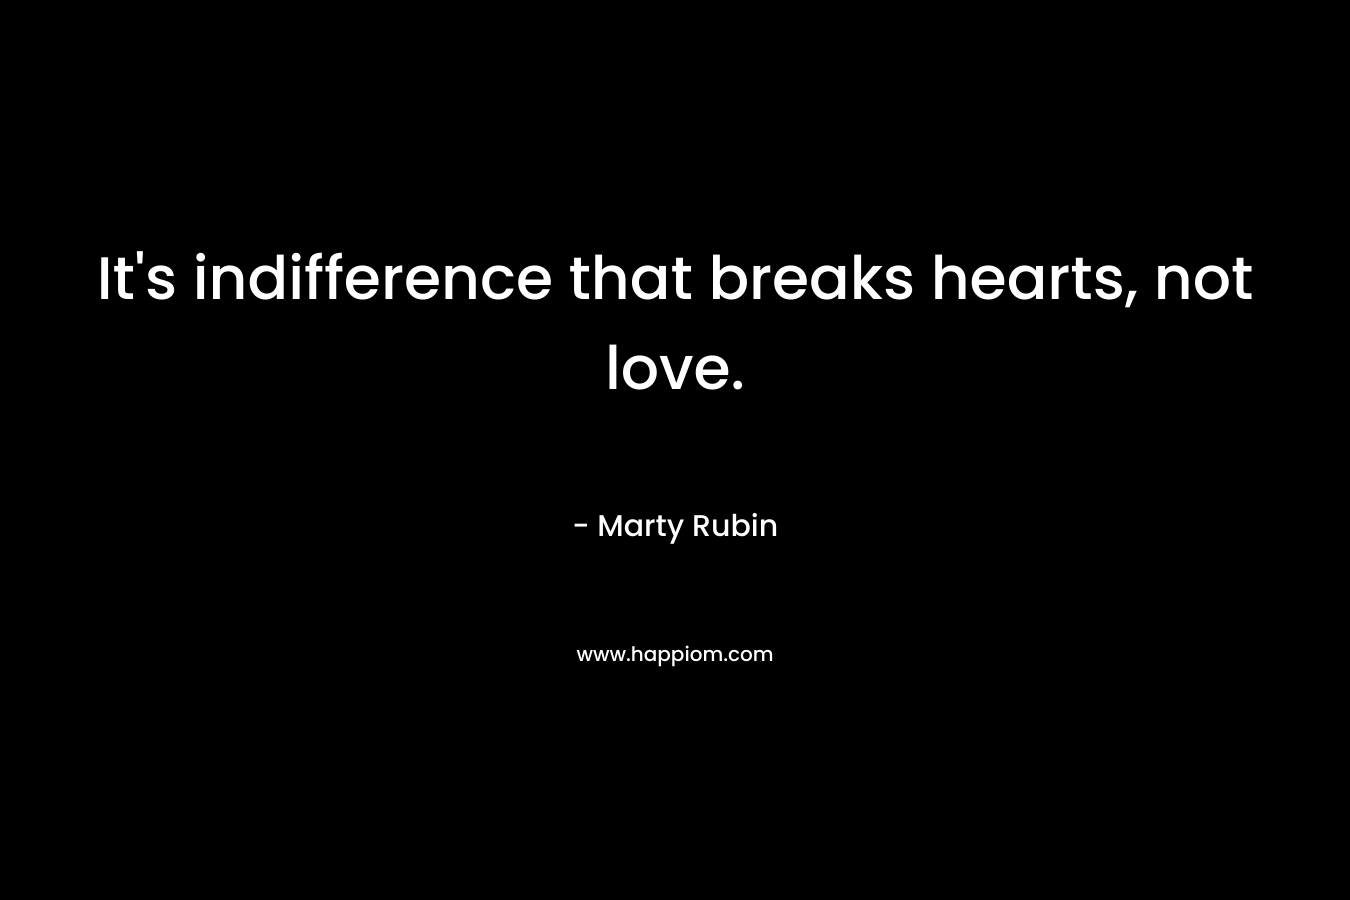 It's indifference that breaks hearts, not love.